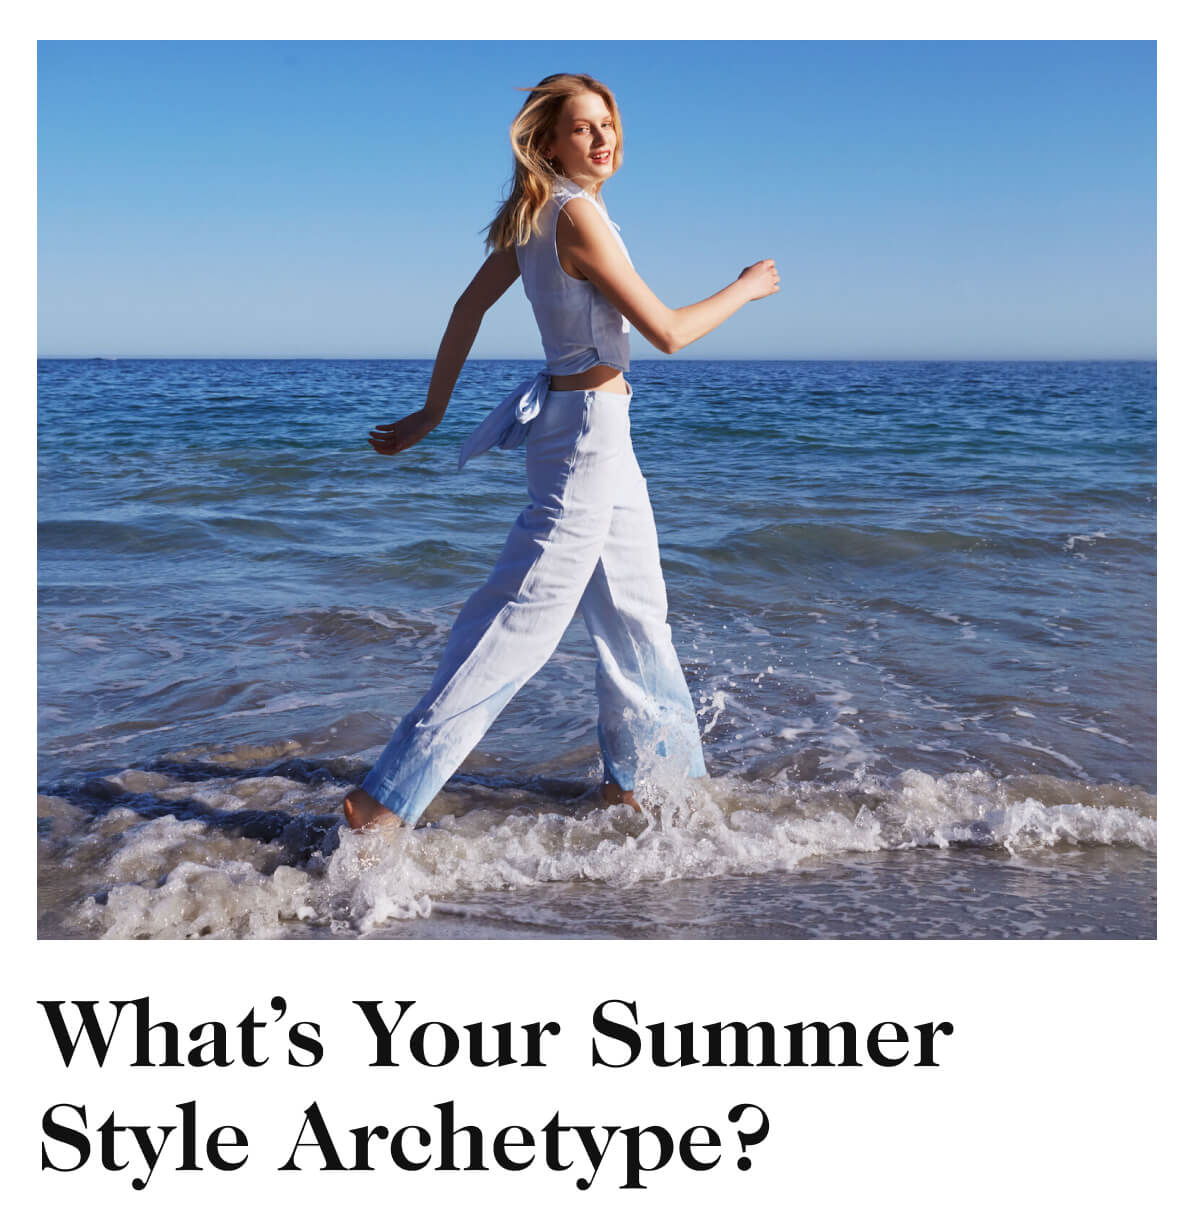 What’s Your Summer Style Archetype?